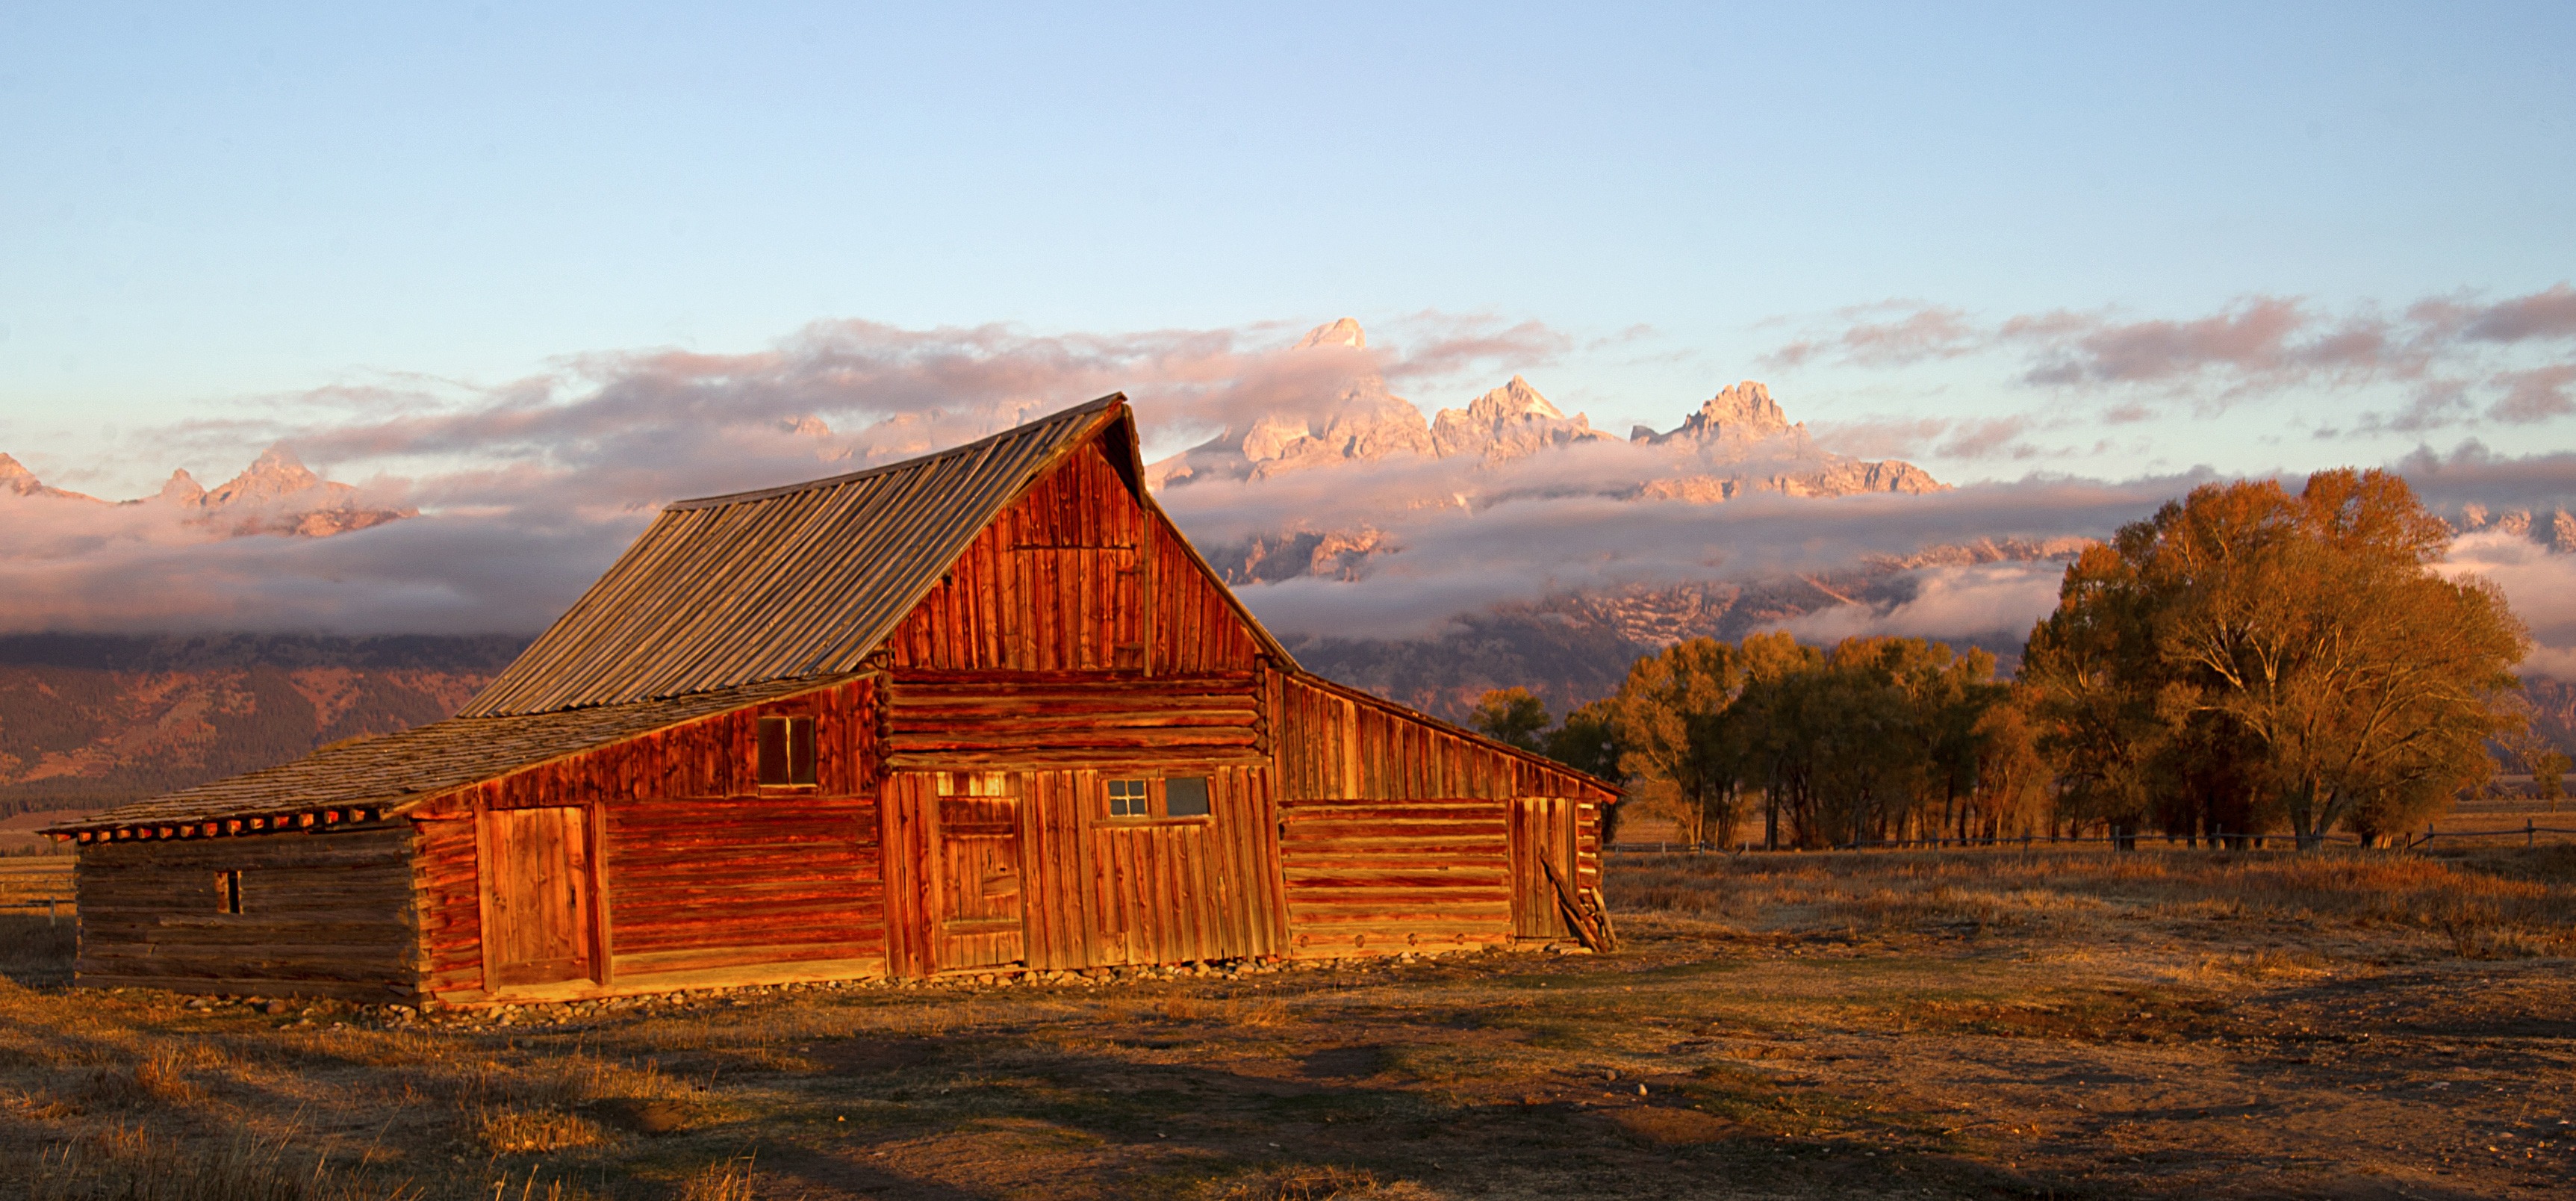 The sun hits the tips of the Grand Tetons behind the Moulton barn October 5, 2012 in the Grand Teton National Park in Wyoming. Grand Teton National Park is located in northwestern Wyoming. Approximately 310,000 acres (130,000 ha) in size, the park includes the major peaks of the 40-mile (64 km) long Teton Range as well as most of the northern sections of the valley known as Jackson Hole. AFP PHOTO/Karen BLEIER        (Photo credit should read KAREN BLEIER/AFP/Getty Images) (Karen Bleier&mdash;Getty Images)